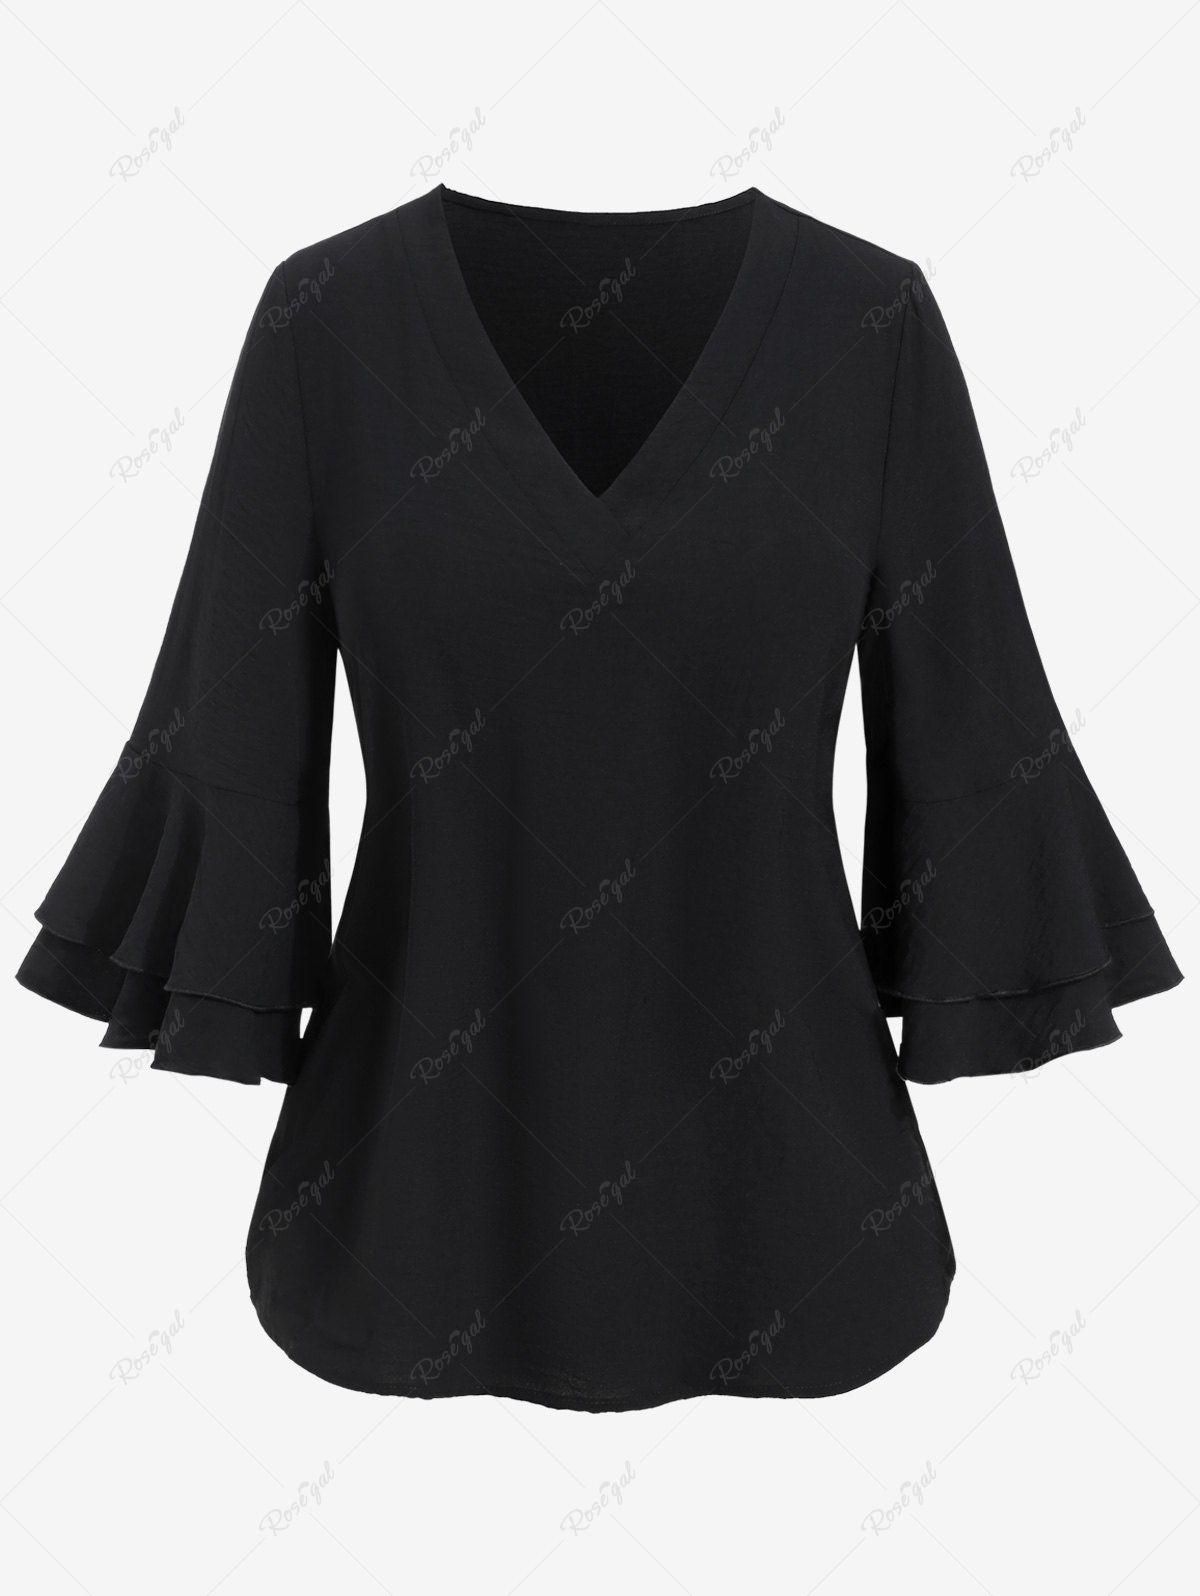 Plus Size Layered Bell Sleeves T-shirt - M